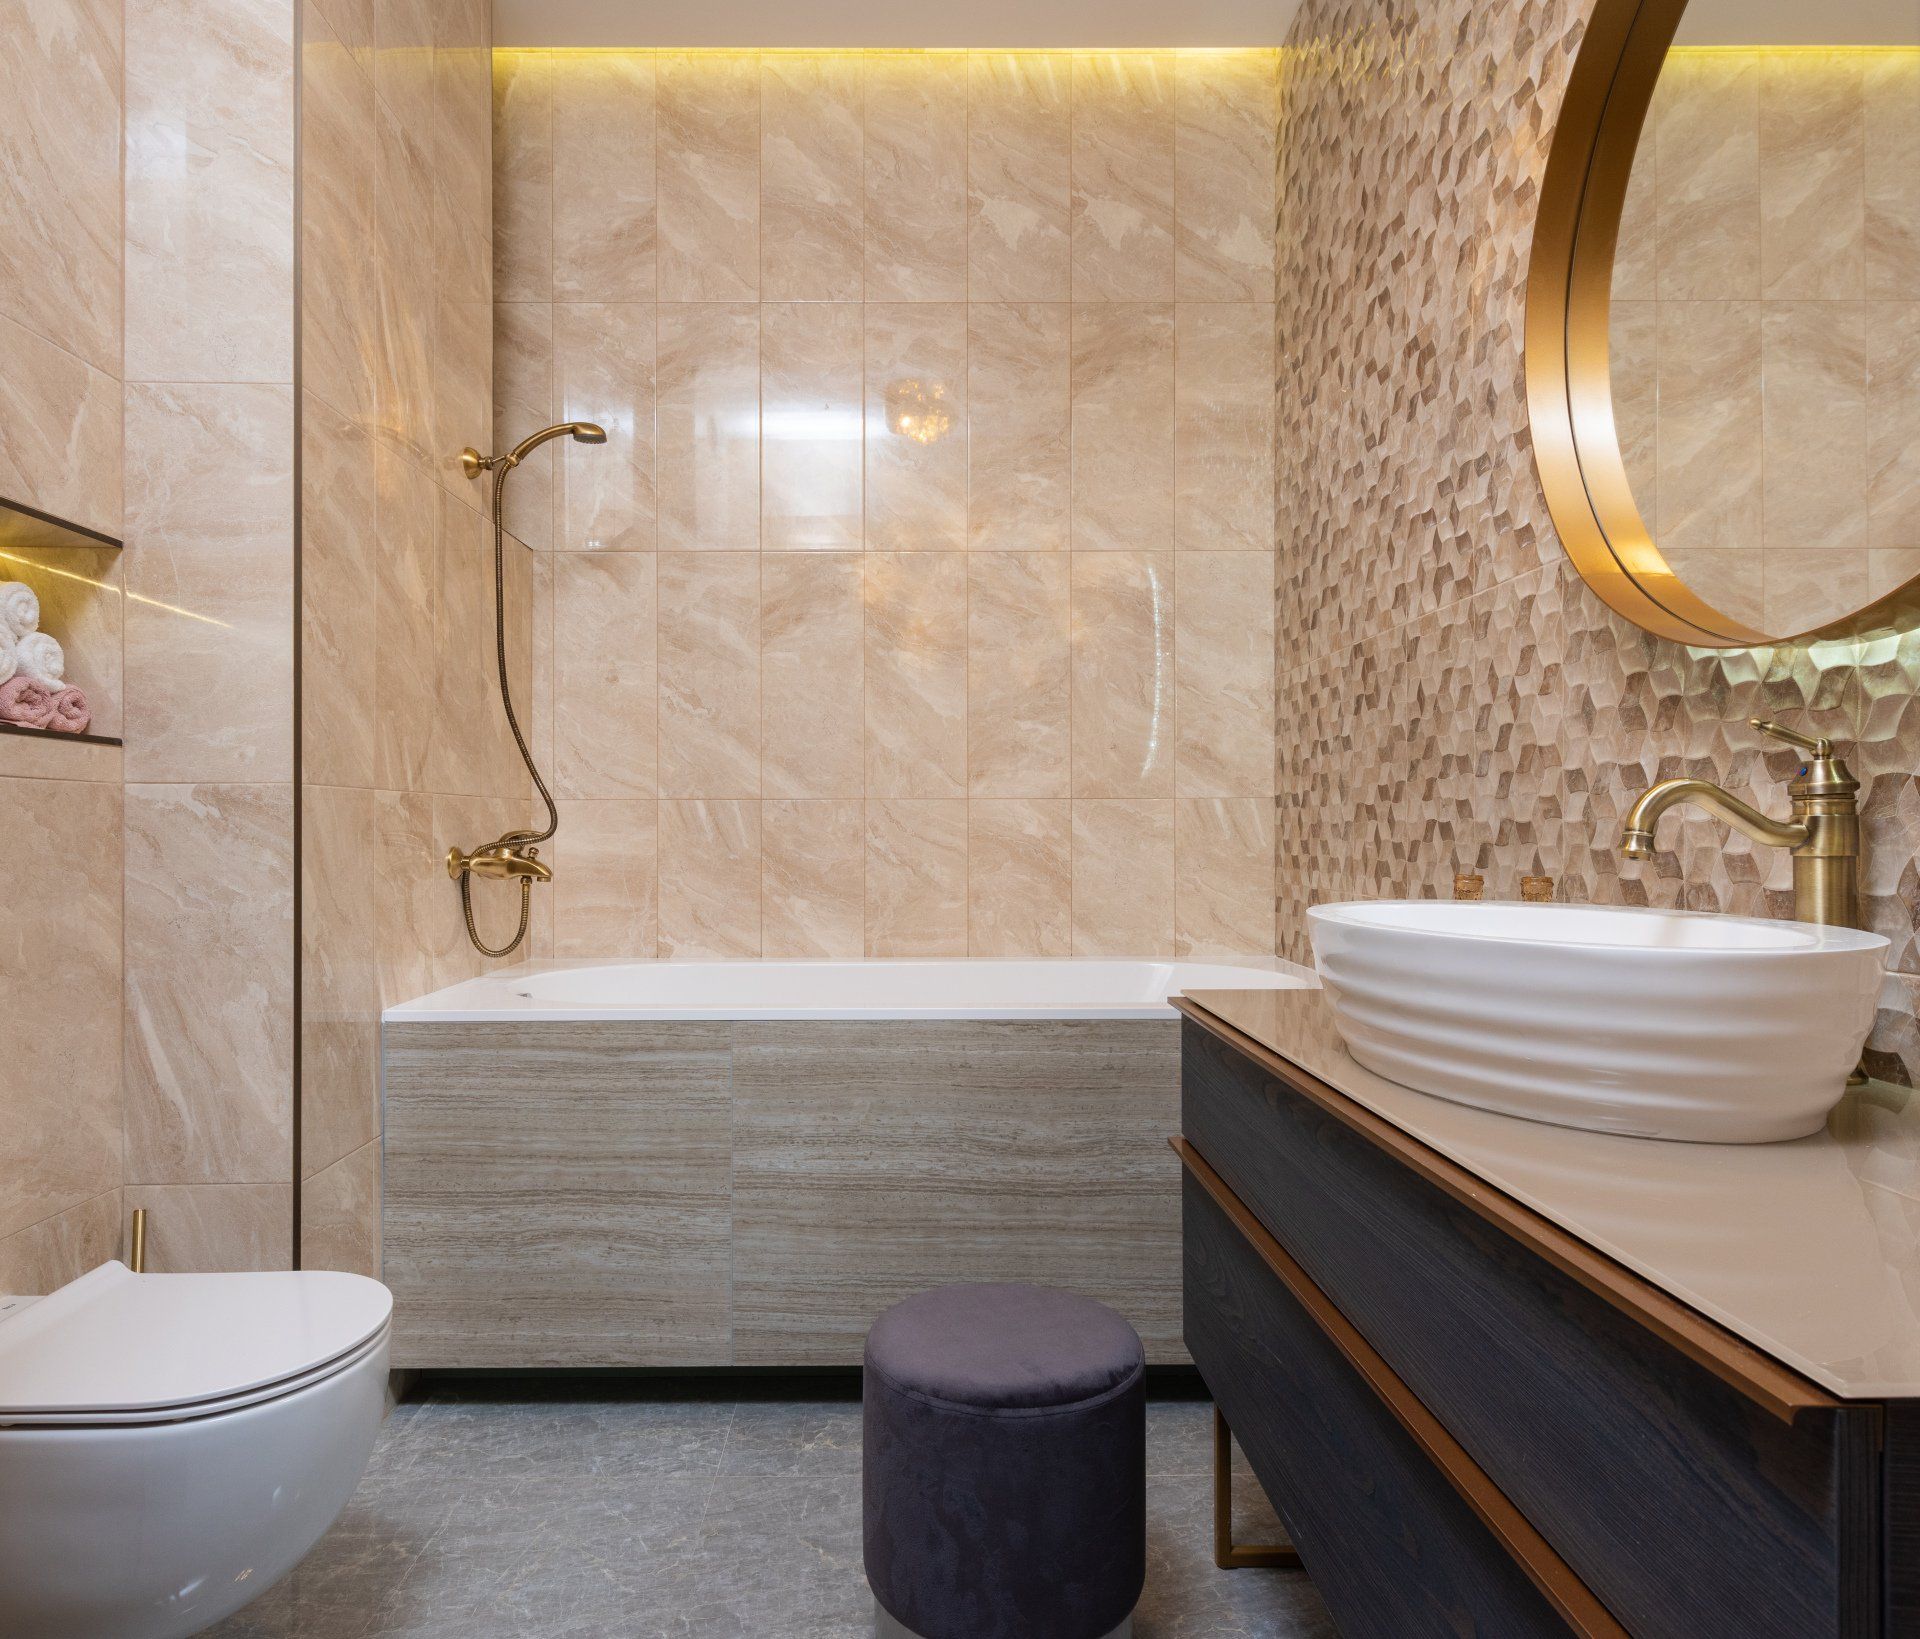 A gold themed bathroom with beautiful tan marbled walls and an accent wall with geometric shapes.